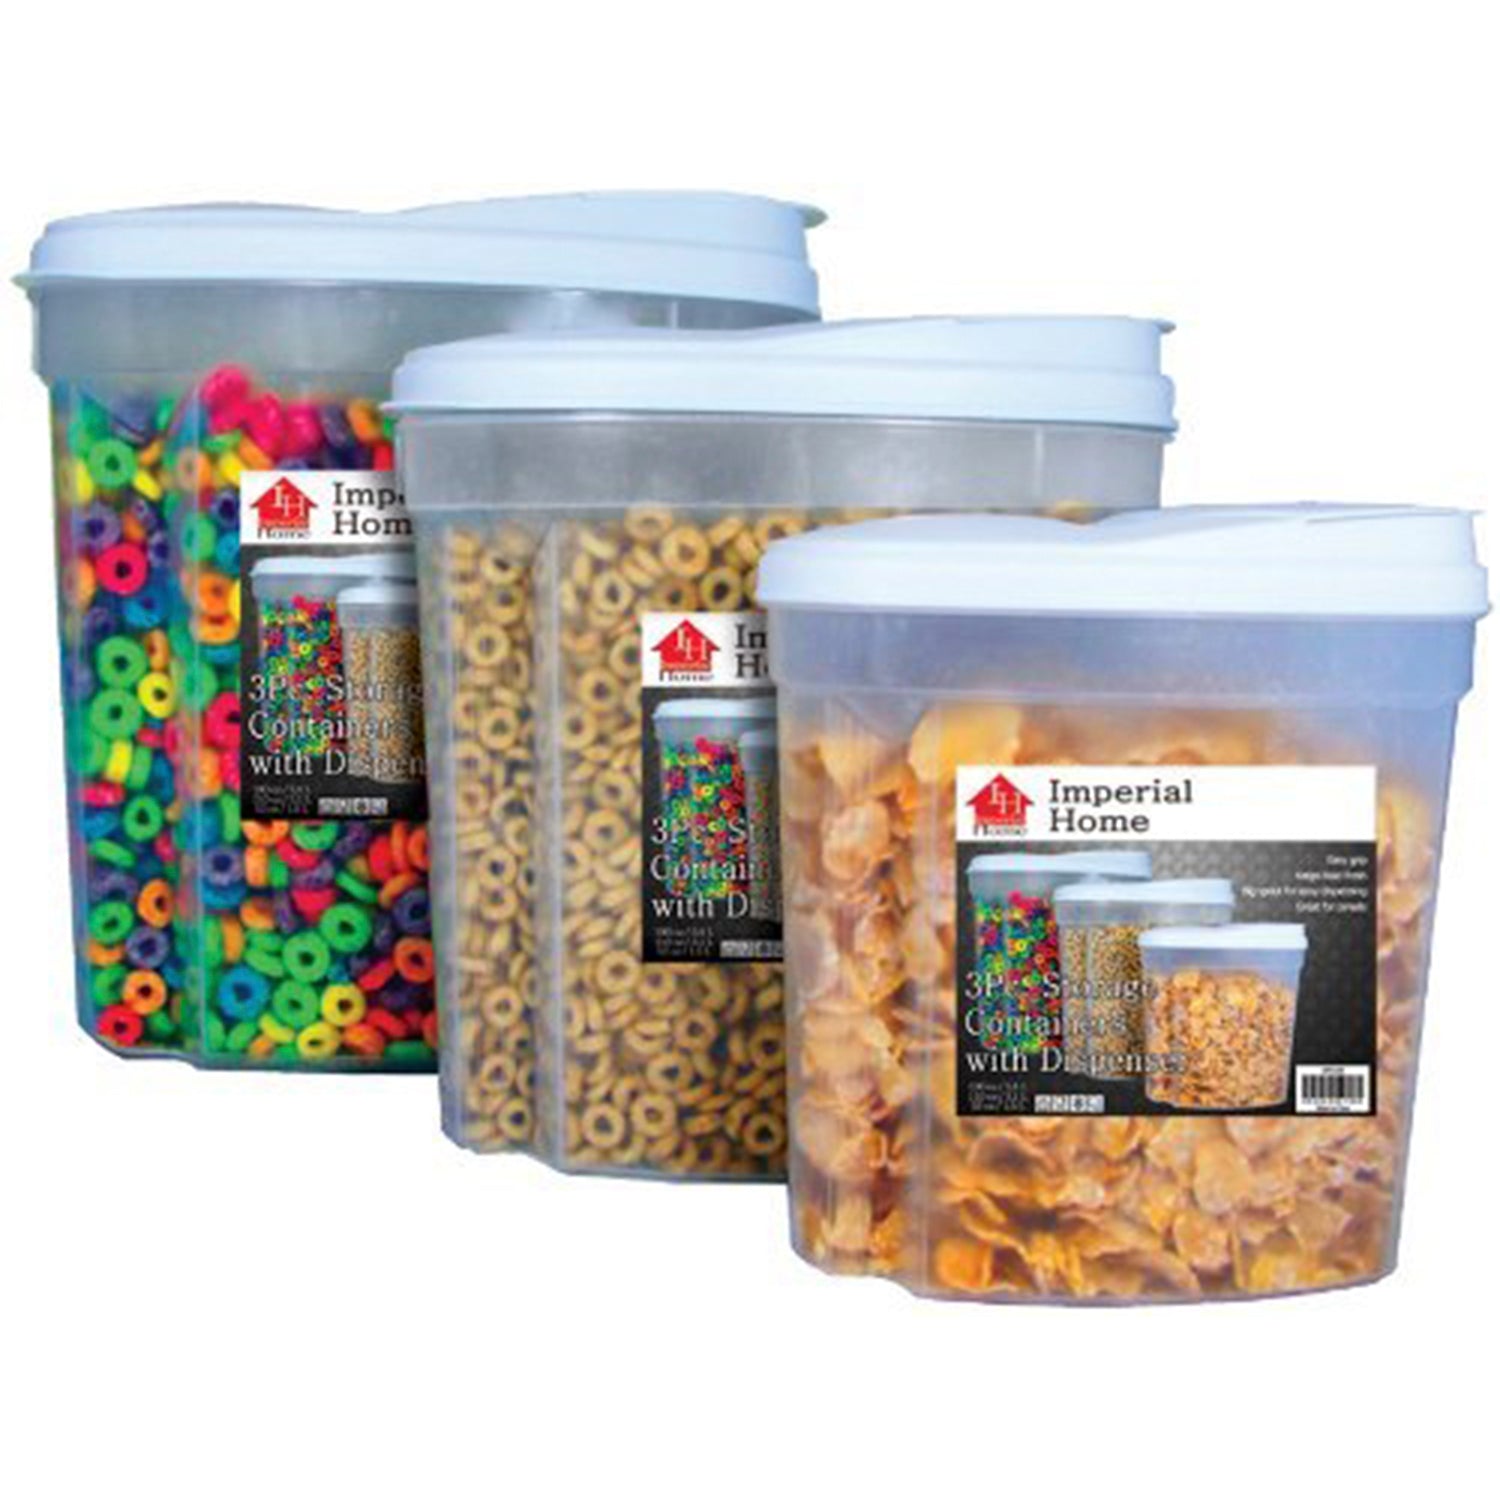 Imperial MW1196 Plastic 3 Piece Cereal Dispenser Set - Dry Food Storage Containers